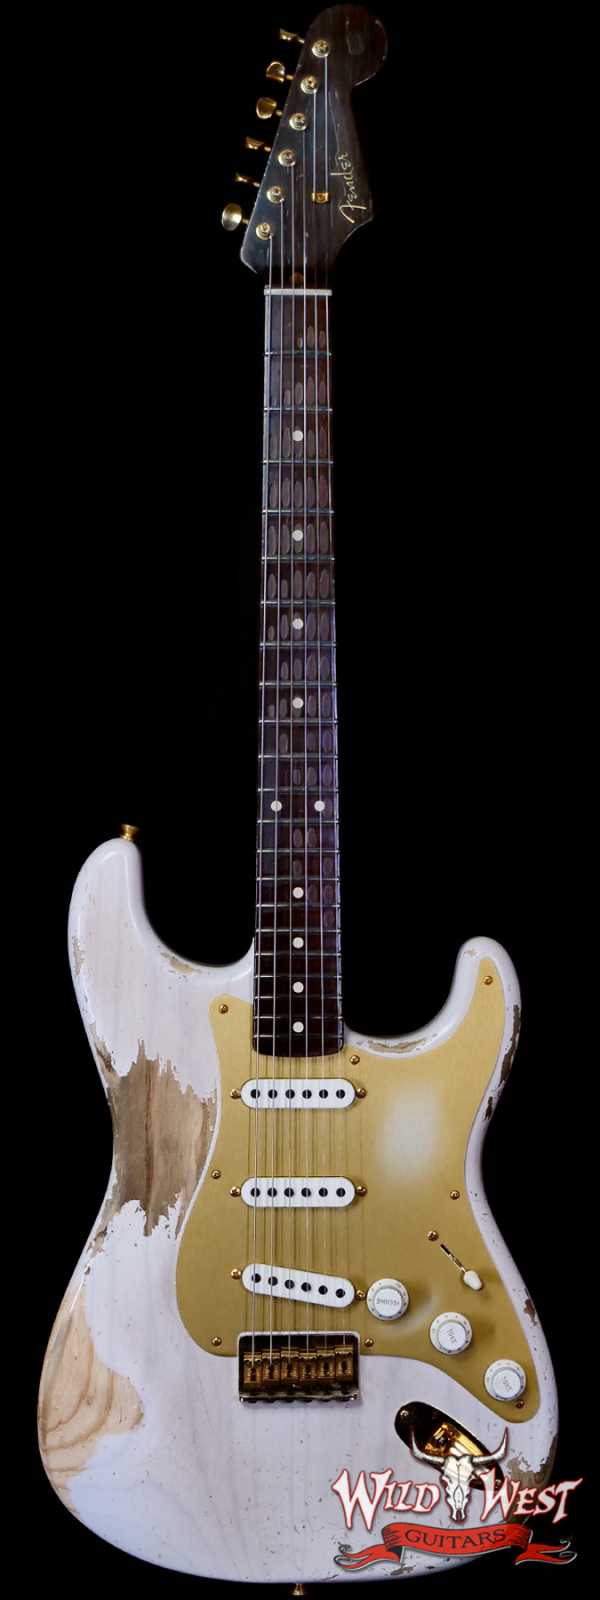 Fender Custom Shop Kyle McMillin Masterbuilt 1957 Hardtail Stratocaster Brazilian Rosewood Neck Heavy Relic White Blonde 6.75 LBS (US Only / No International Shipping)